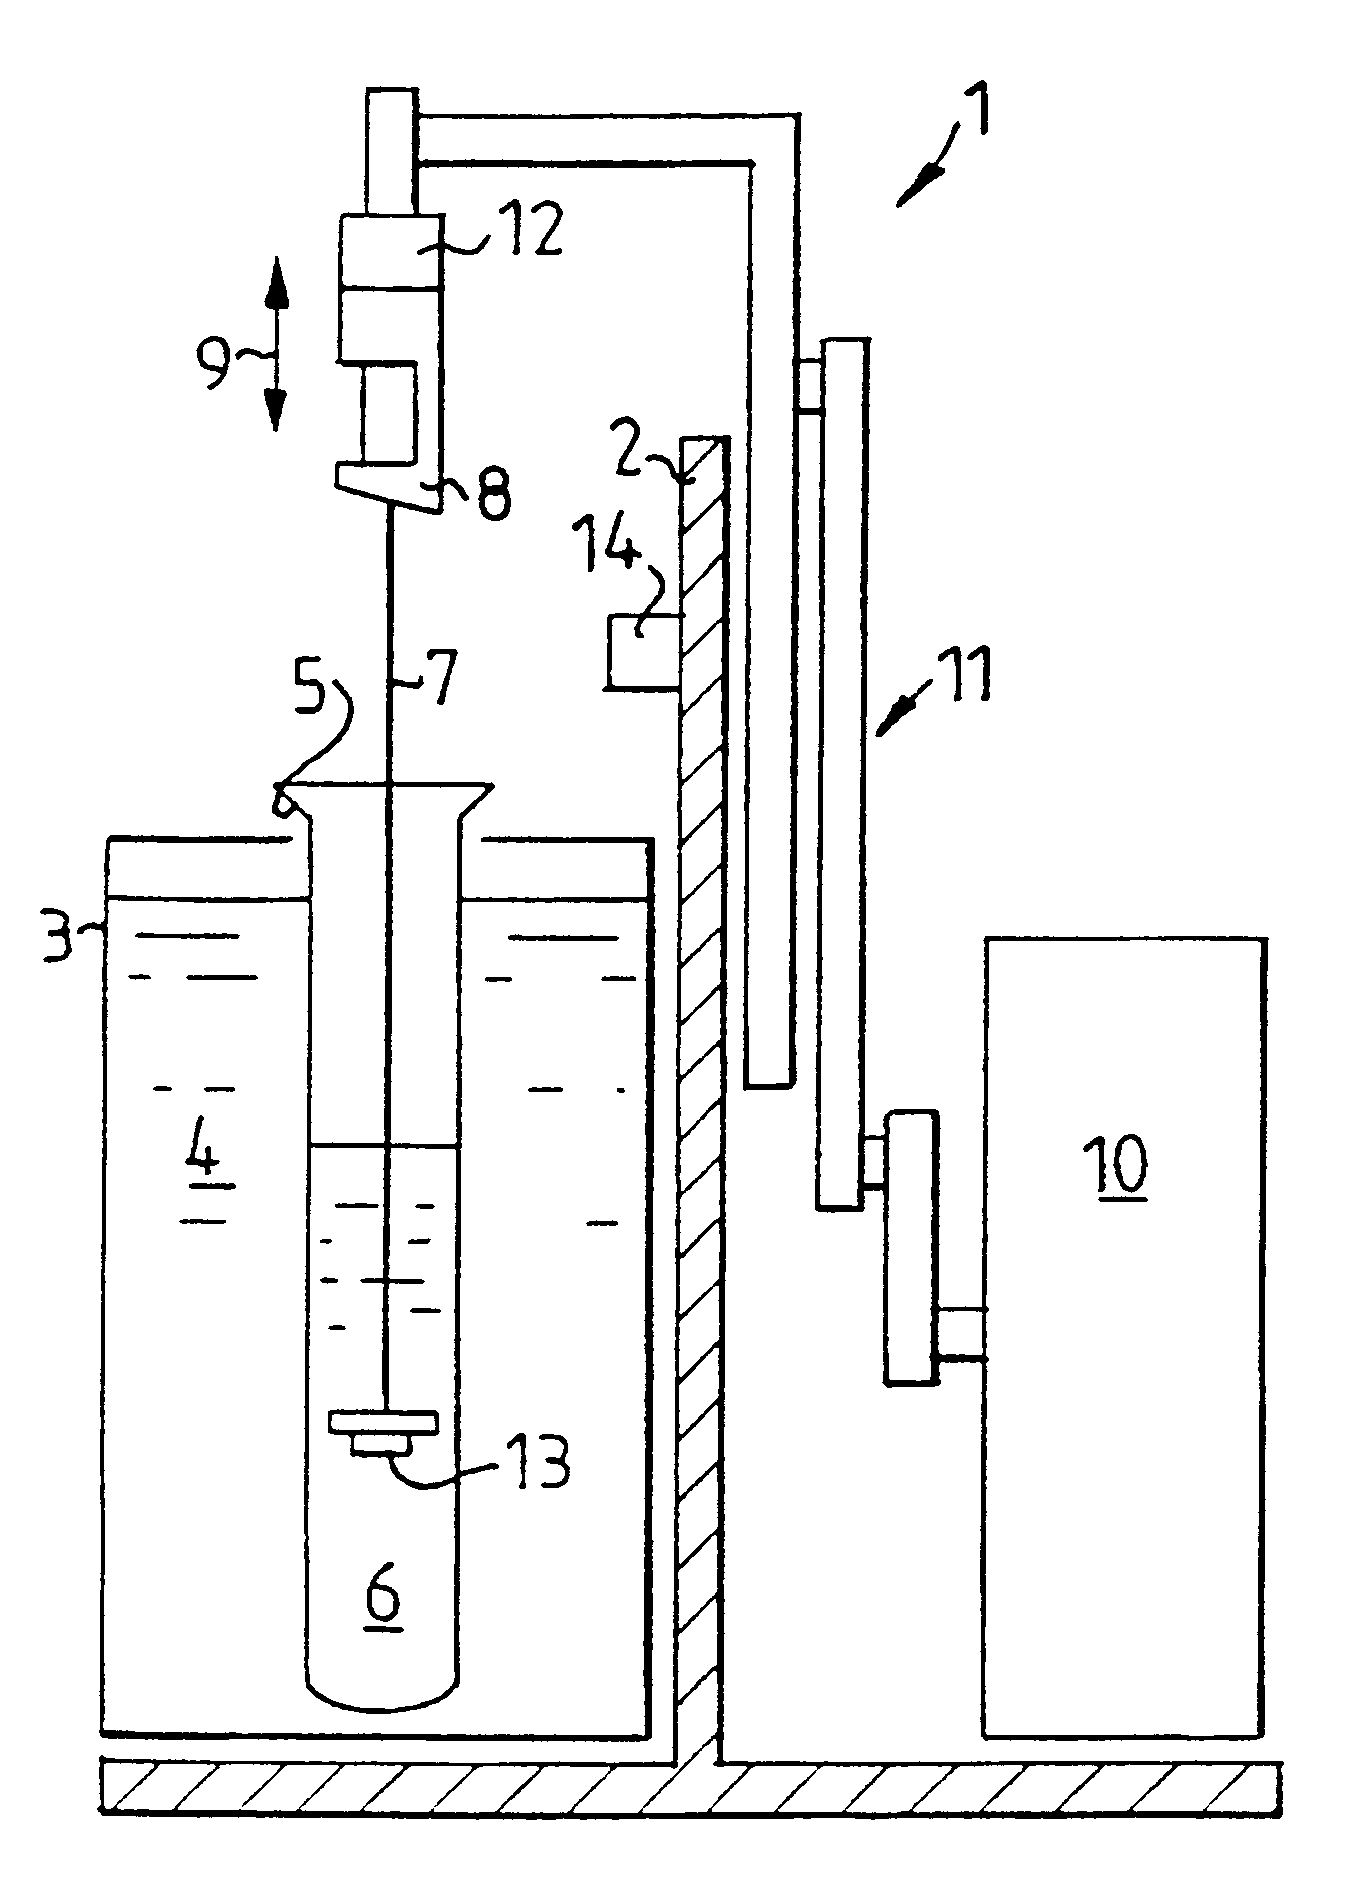 Device and method for analyzing starch-containing product